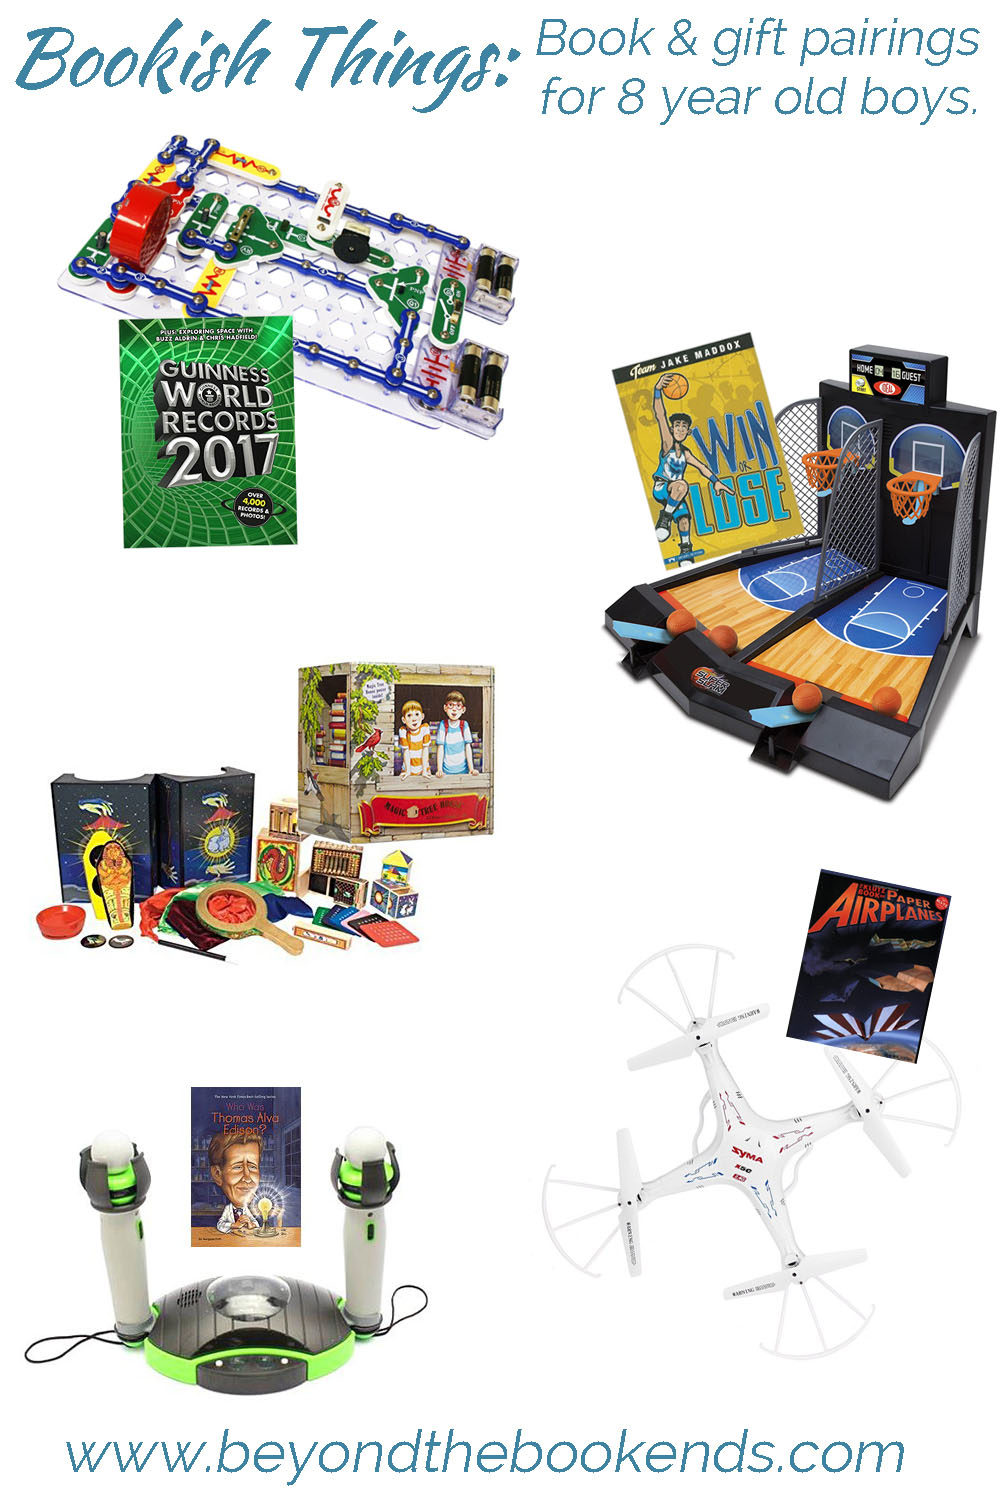 Bookish Things: Book & Gift Pairings for 8 Year Old Boys